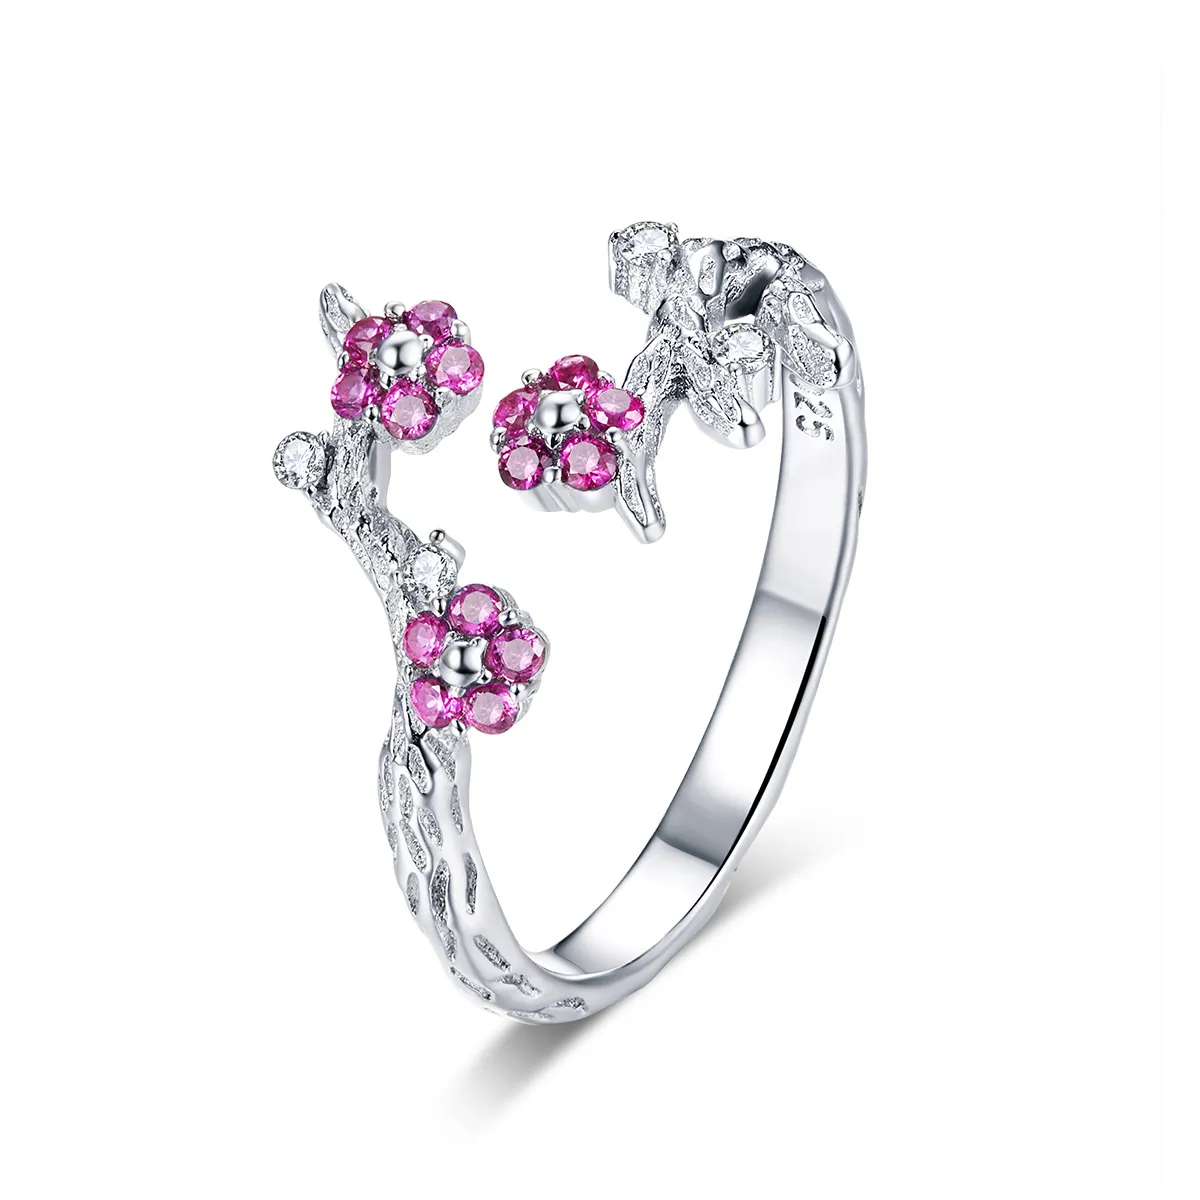 Pandora Style Silver Plum blossom Open Ring - BSR022